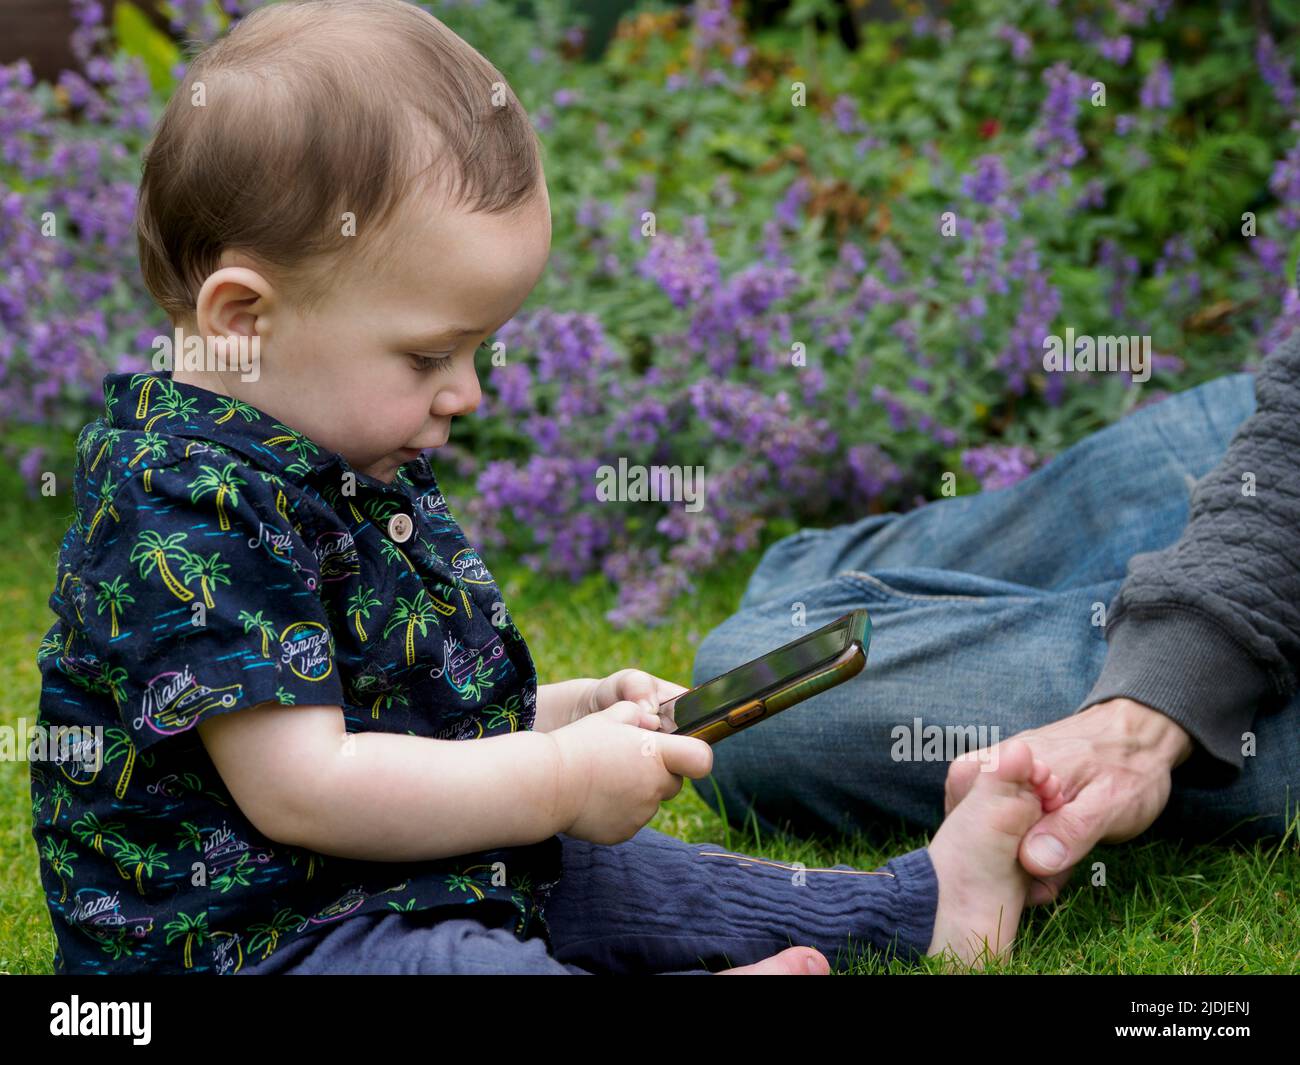 Teething toddler sat on grass playing with a phone, Devon, UK Stock Photo